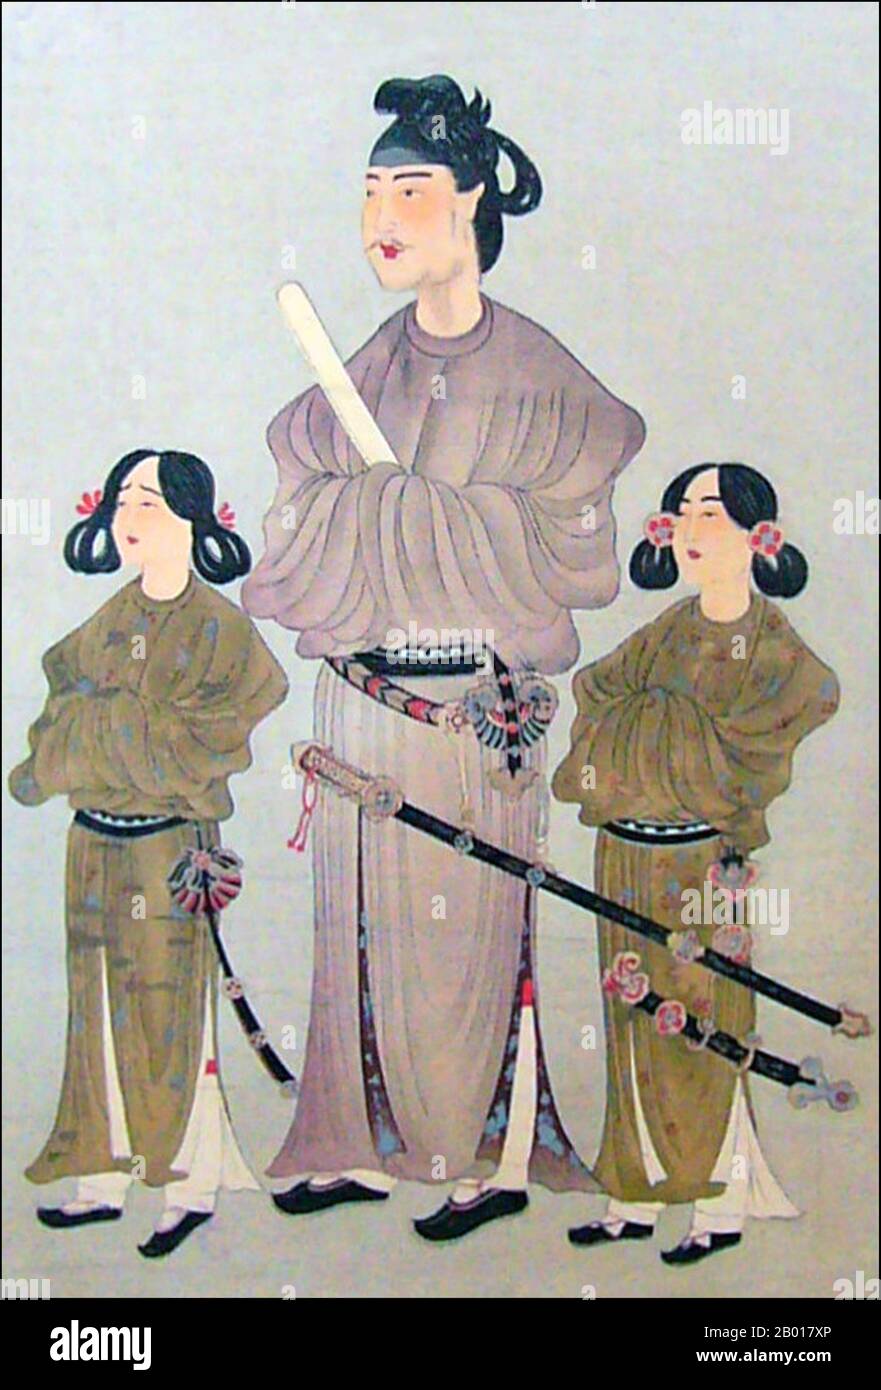 Japan: Prince Shotoku (7 February 574 - 8 April 622) flanked by his younger brother (left: Prince Eguri) and first son (right: Prince Yamashiro). Hanging scroll painting, c. 8th century.  Prince Shotoku, also known as Prince Umayado, was a regent and a politician of the Asuka period. The son of Emperor Yomei, he was a member of the ruling Soga clan. Shotoku was appointed as regent (Sessho) in 593 by Empress Suiko, his aunt.  Shotoku, inspired by Buddhist teachings, succeeded in establishing a centralised government during his reign. He heavily promoted Buddhism with a national project. Stock Photo